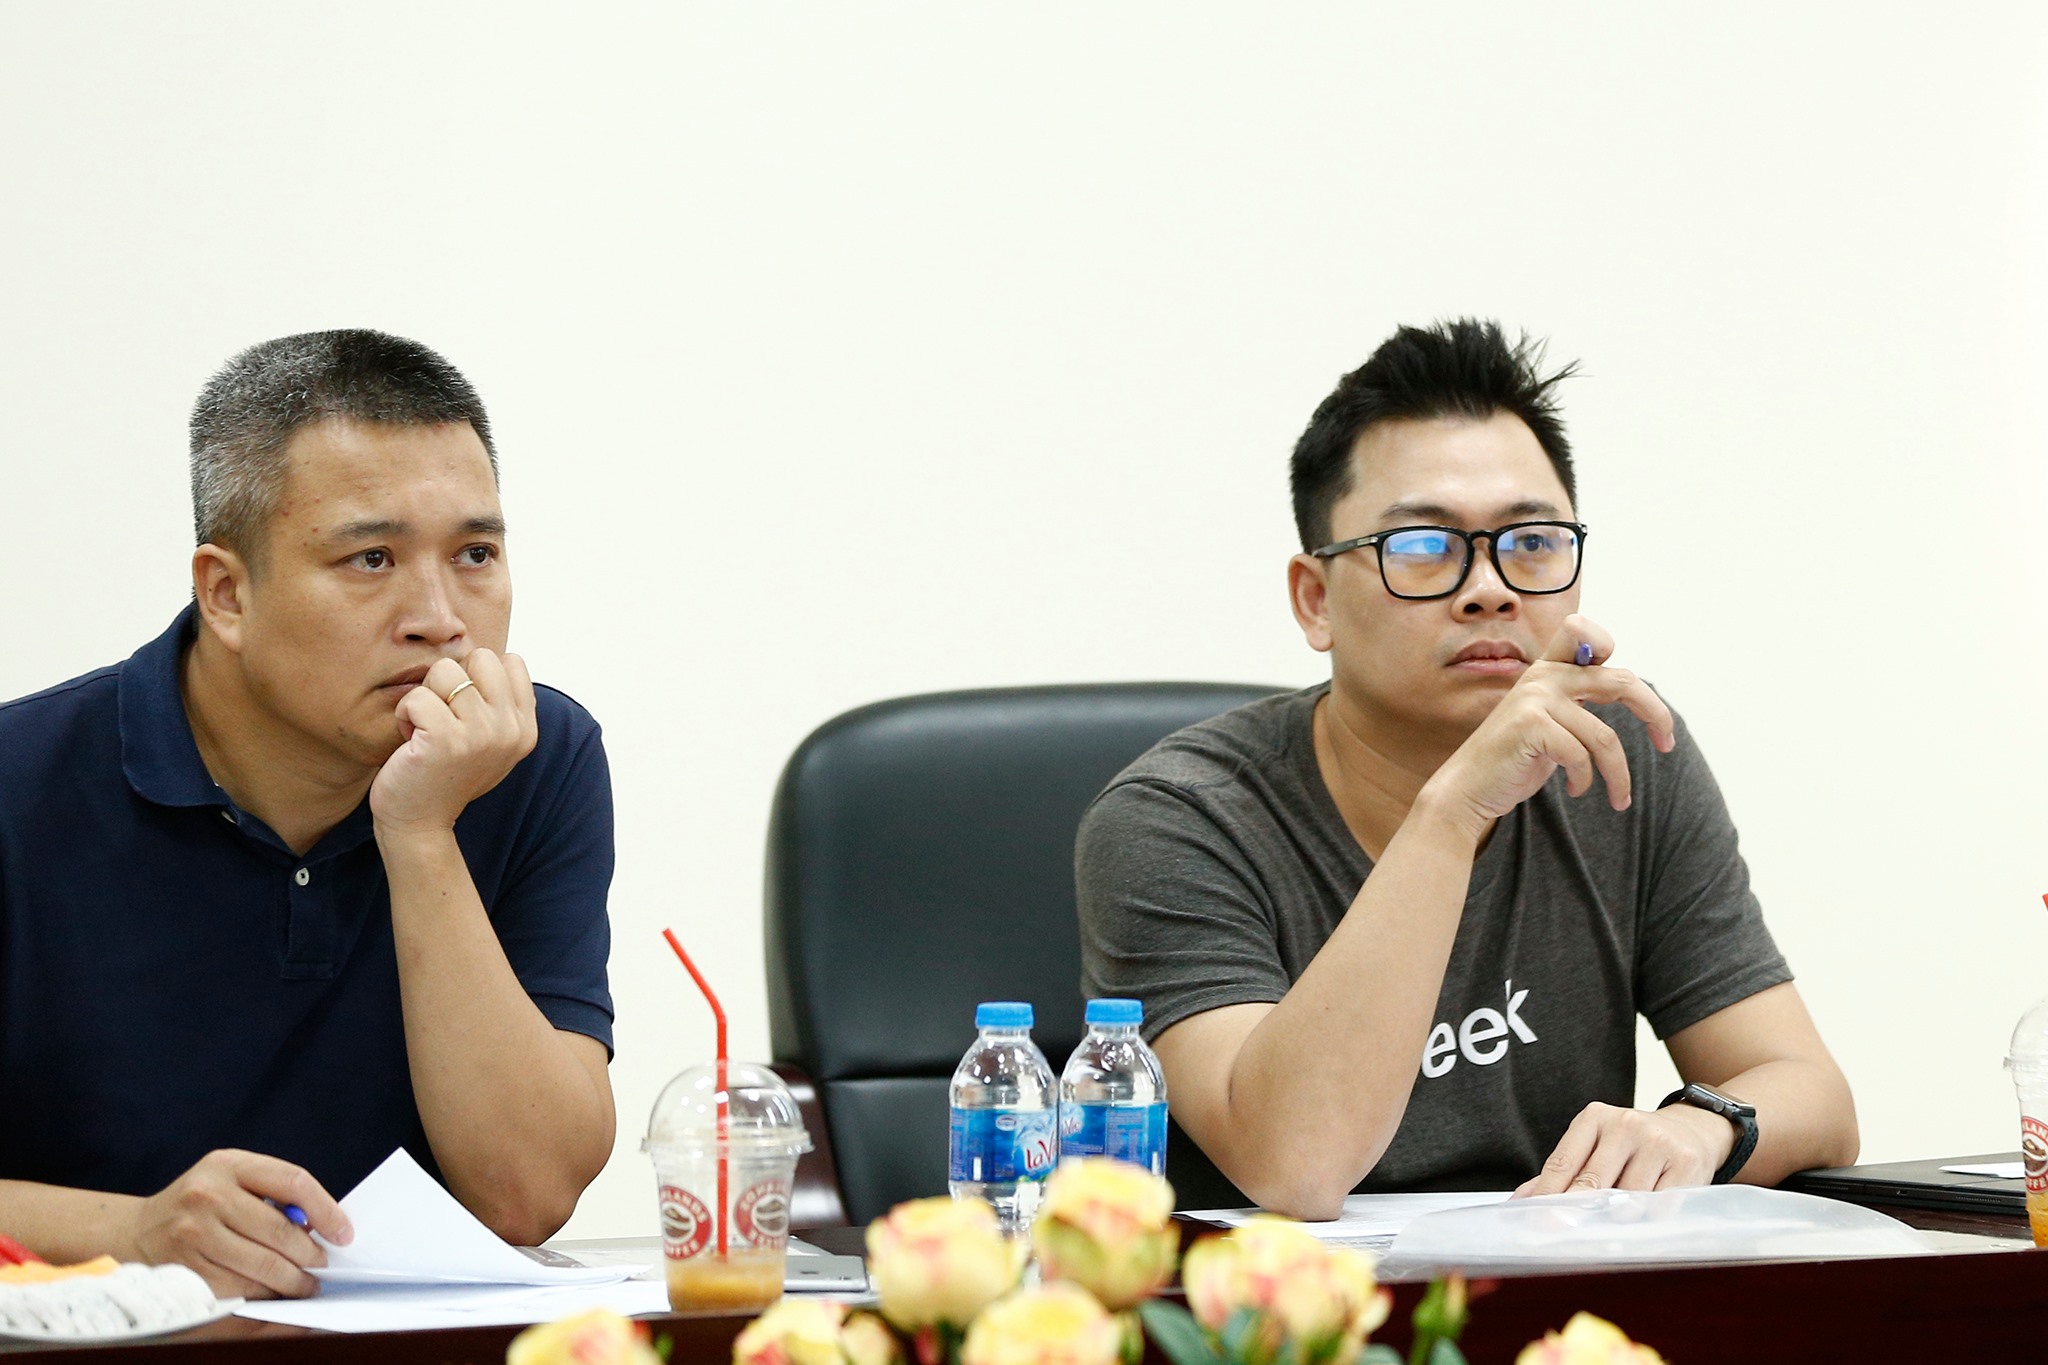 CTO Luong Tuan Thanh serves as a judge for the final round of SOICT-IBM Hackathon 2020